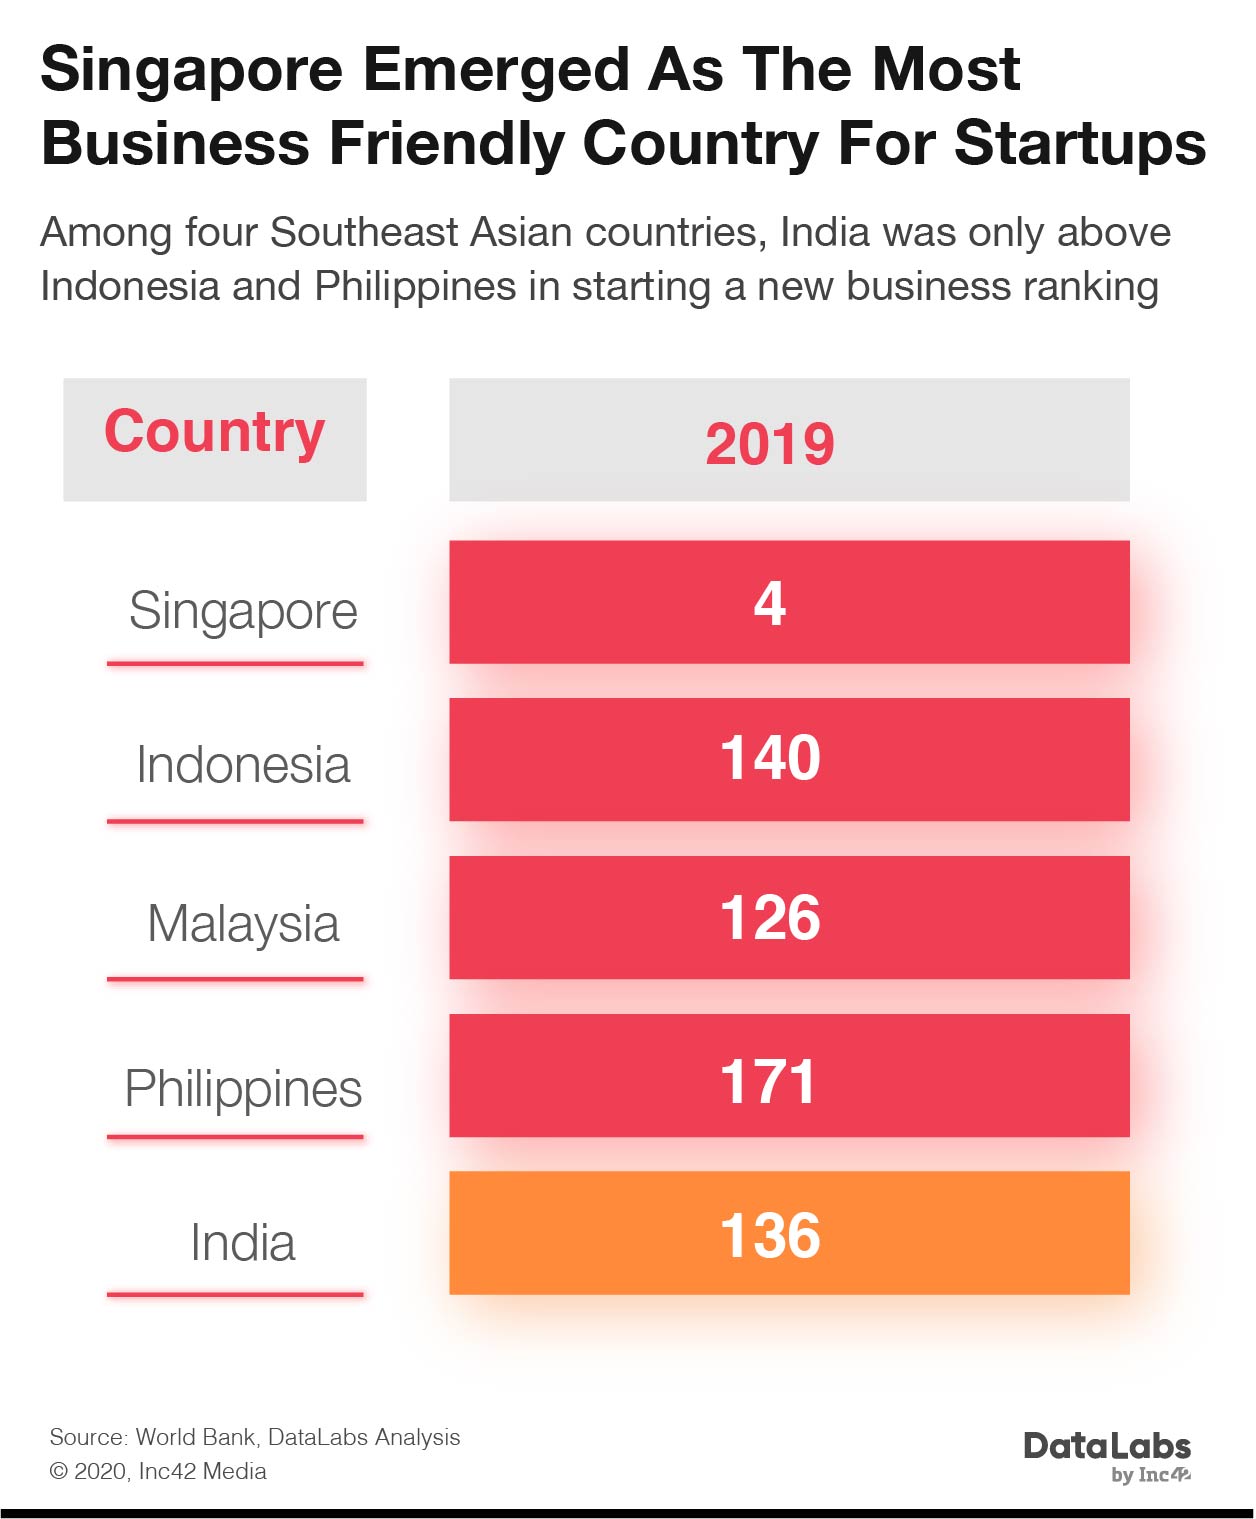 Indian Startups in Southeast Asia